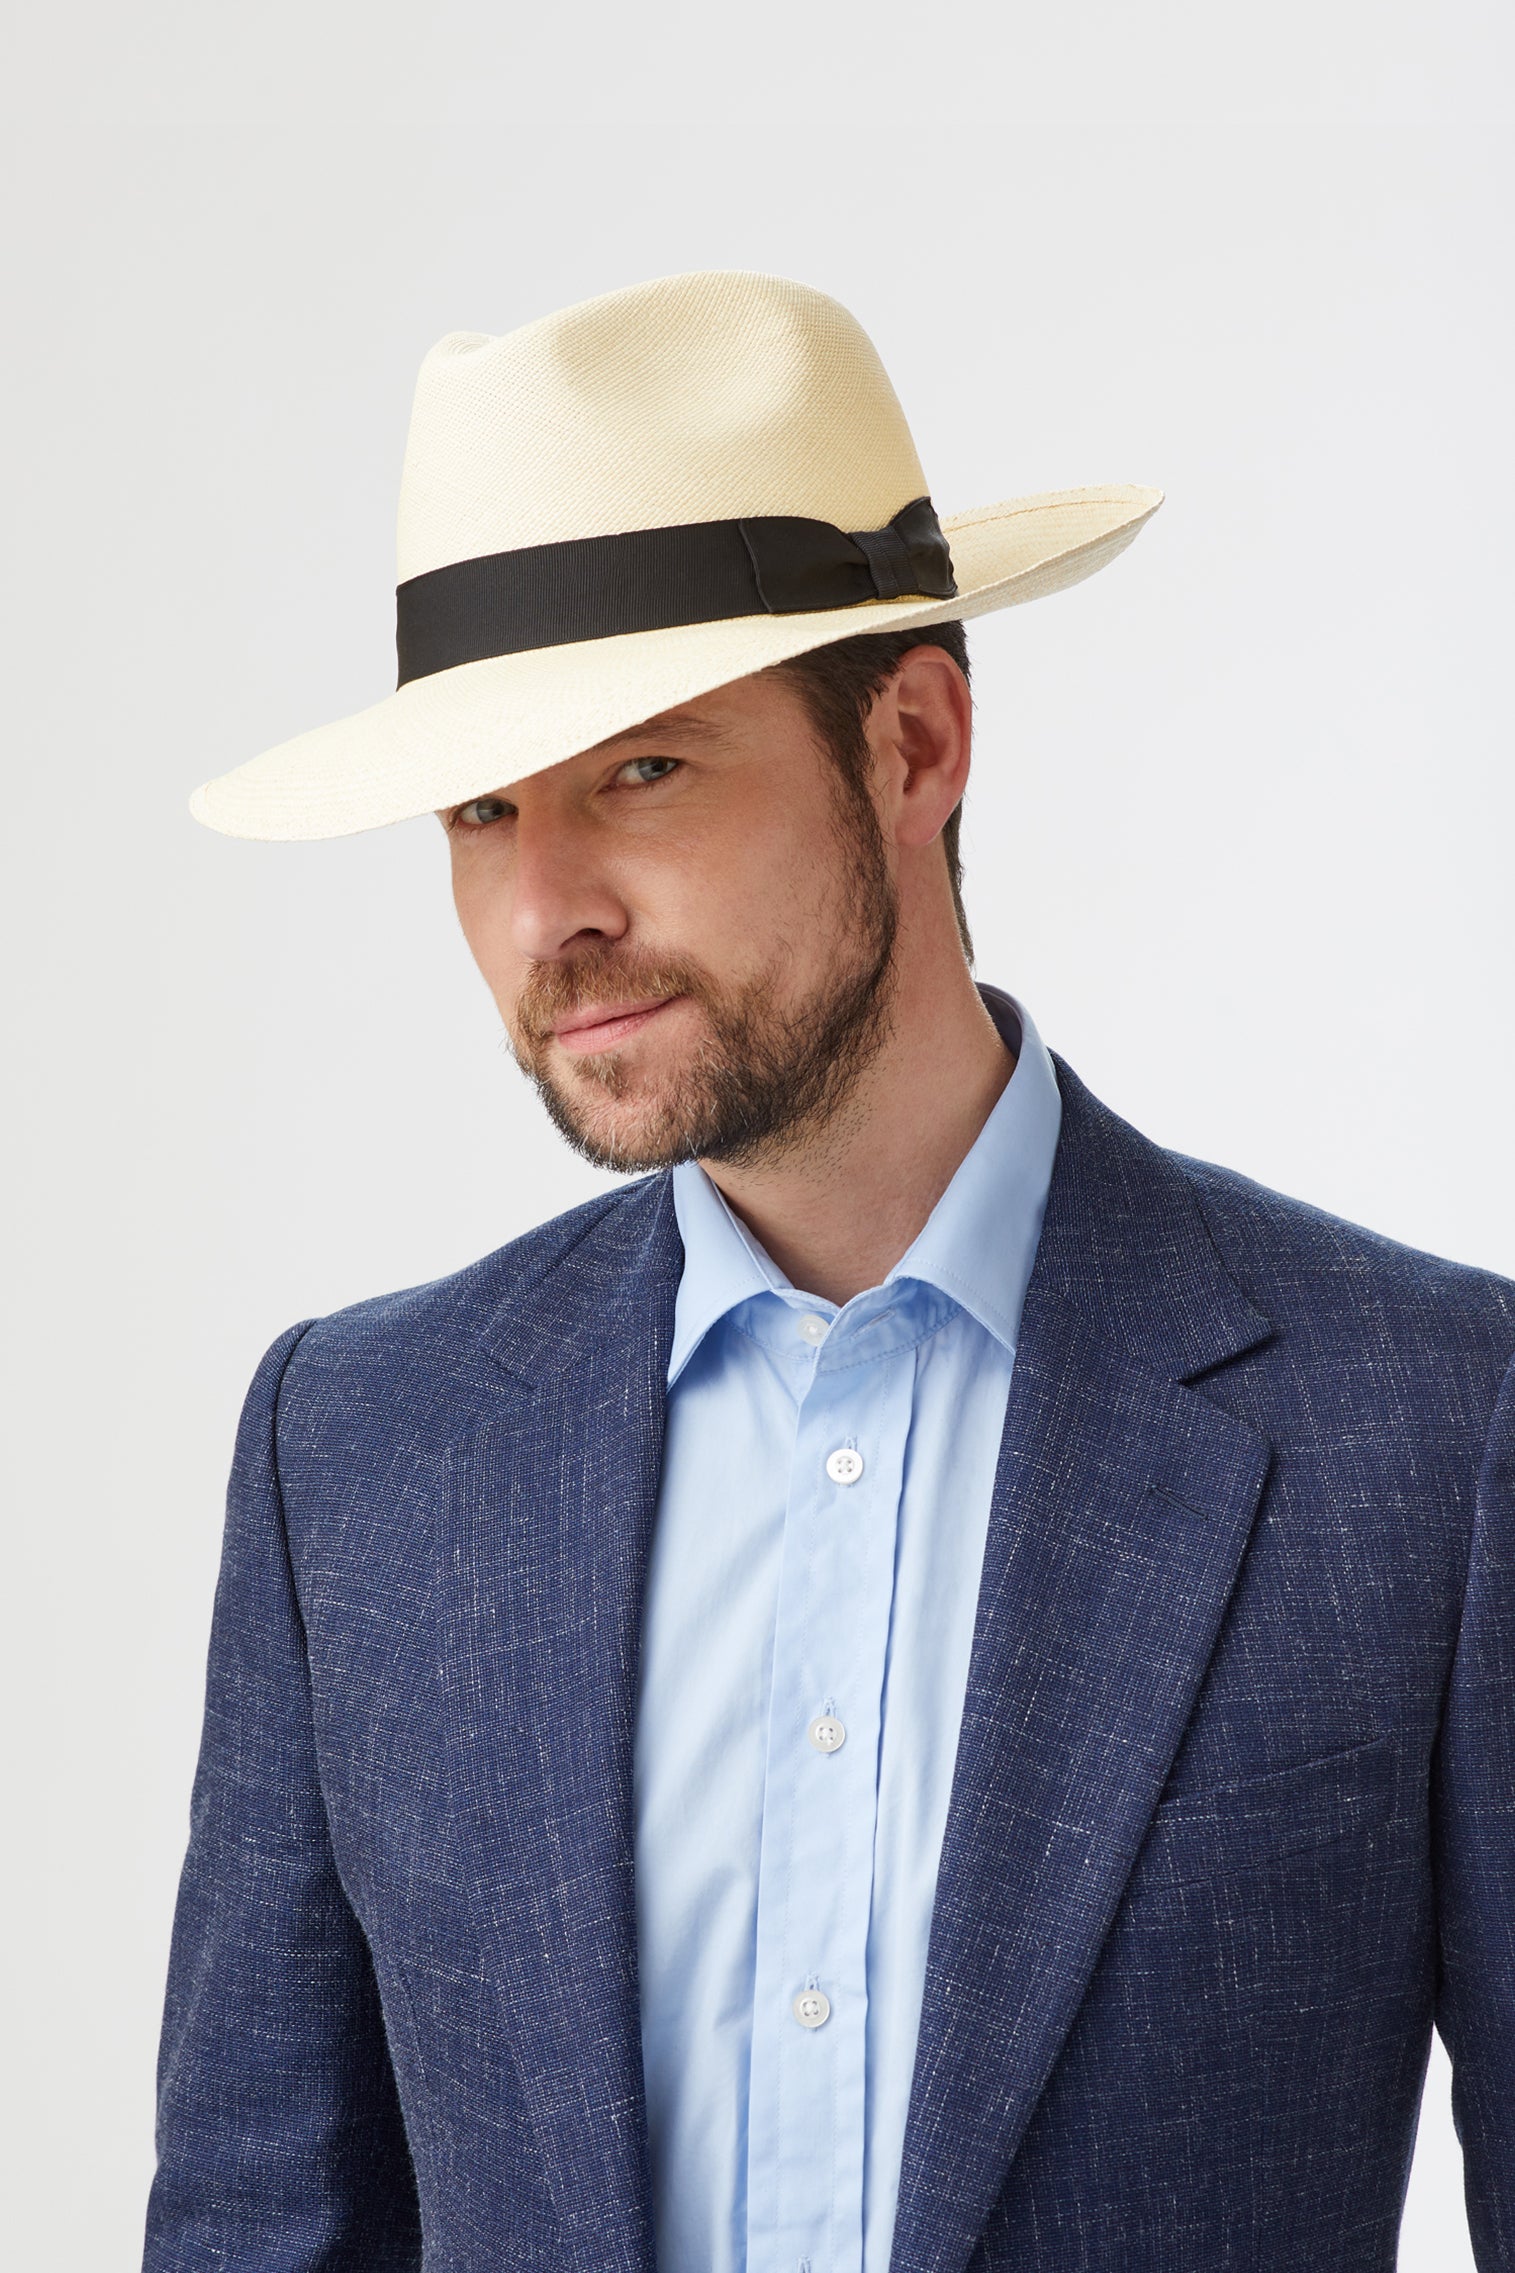 Lock & Co. Summer 2023 Selection of Sun Hats for Men